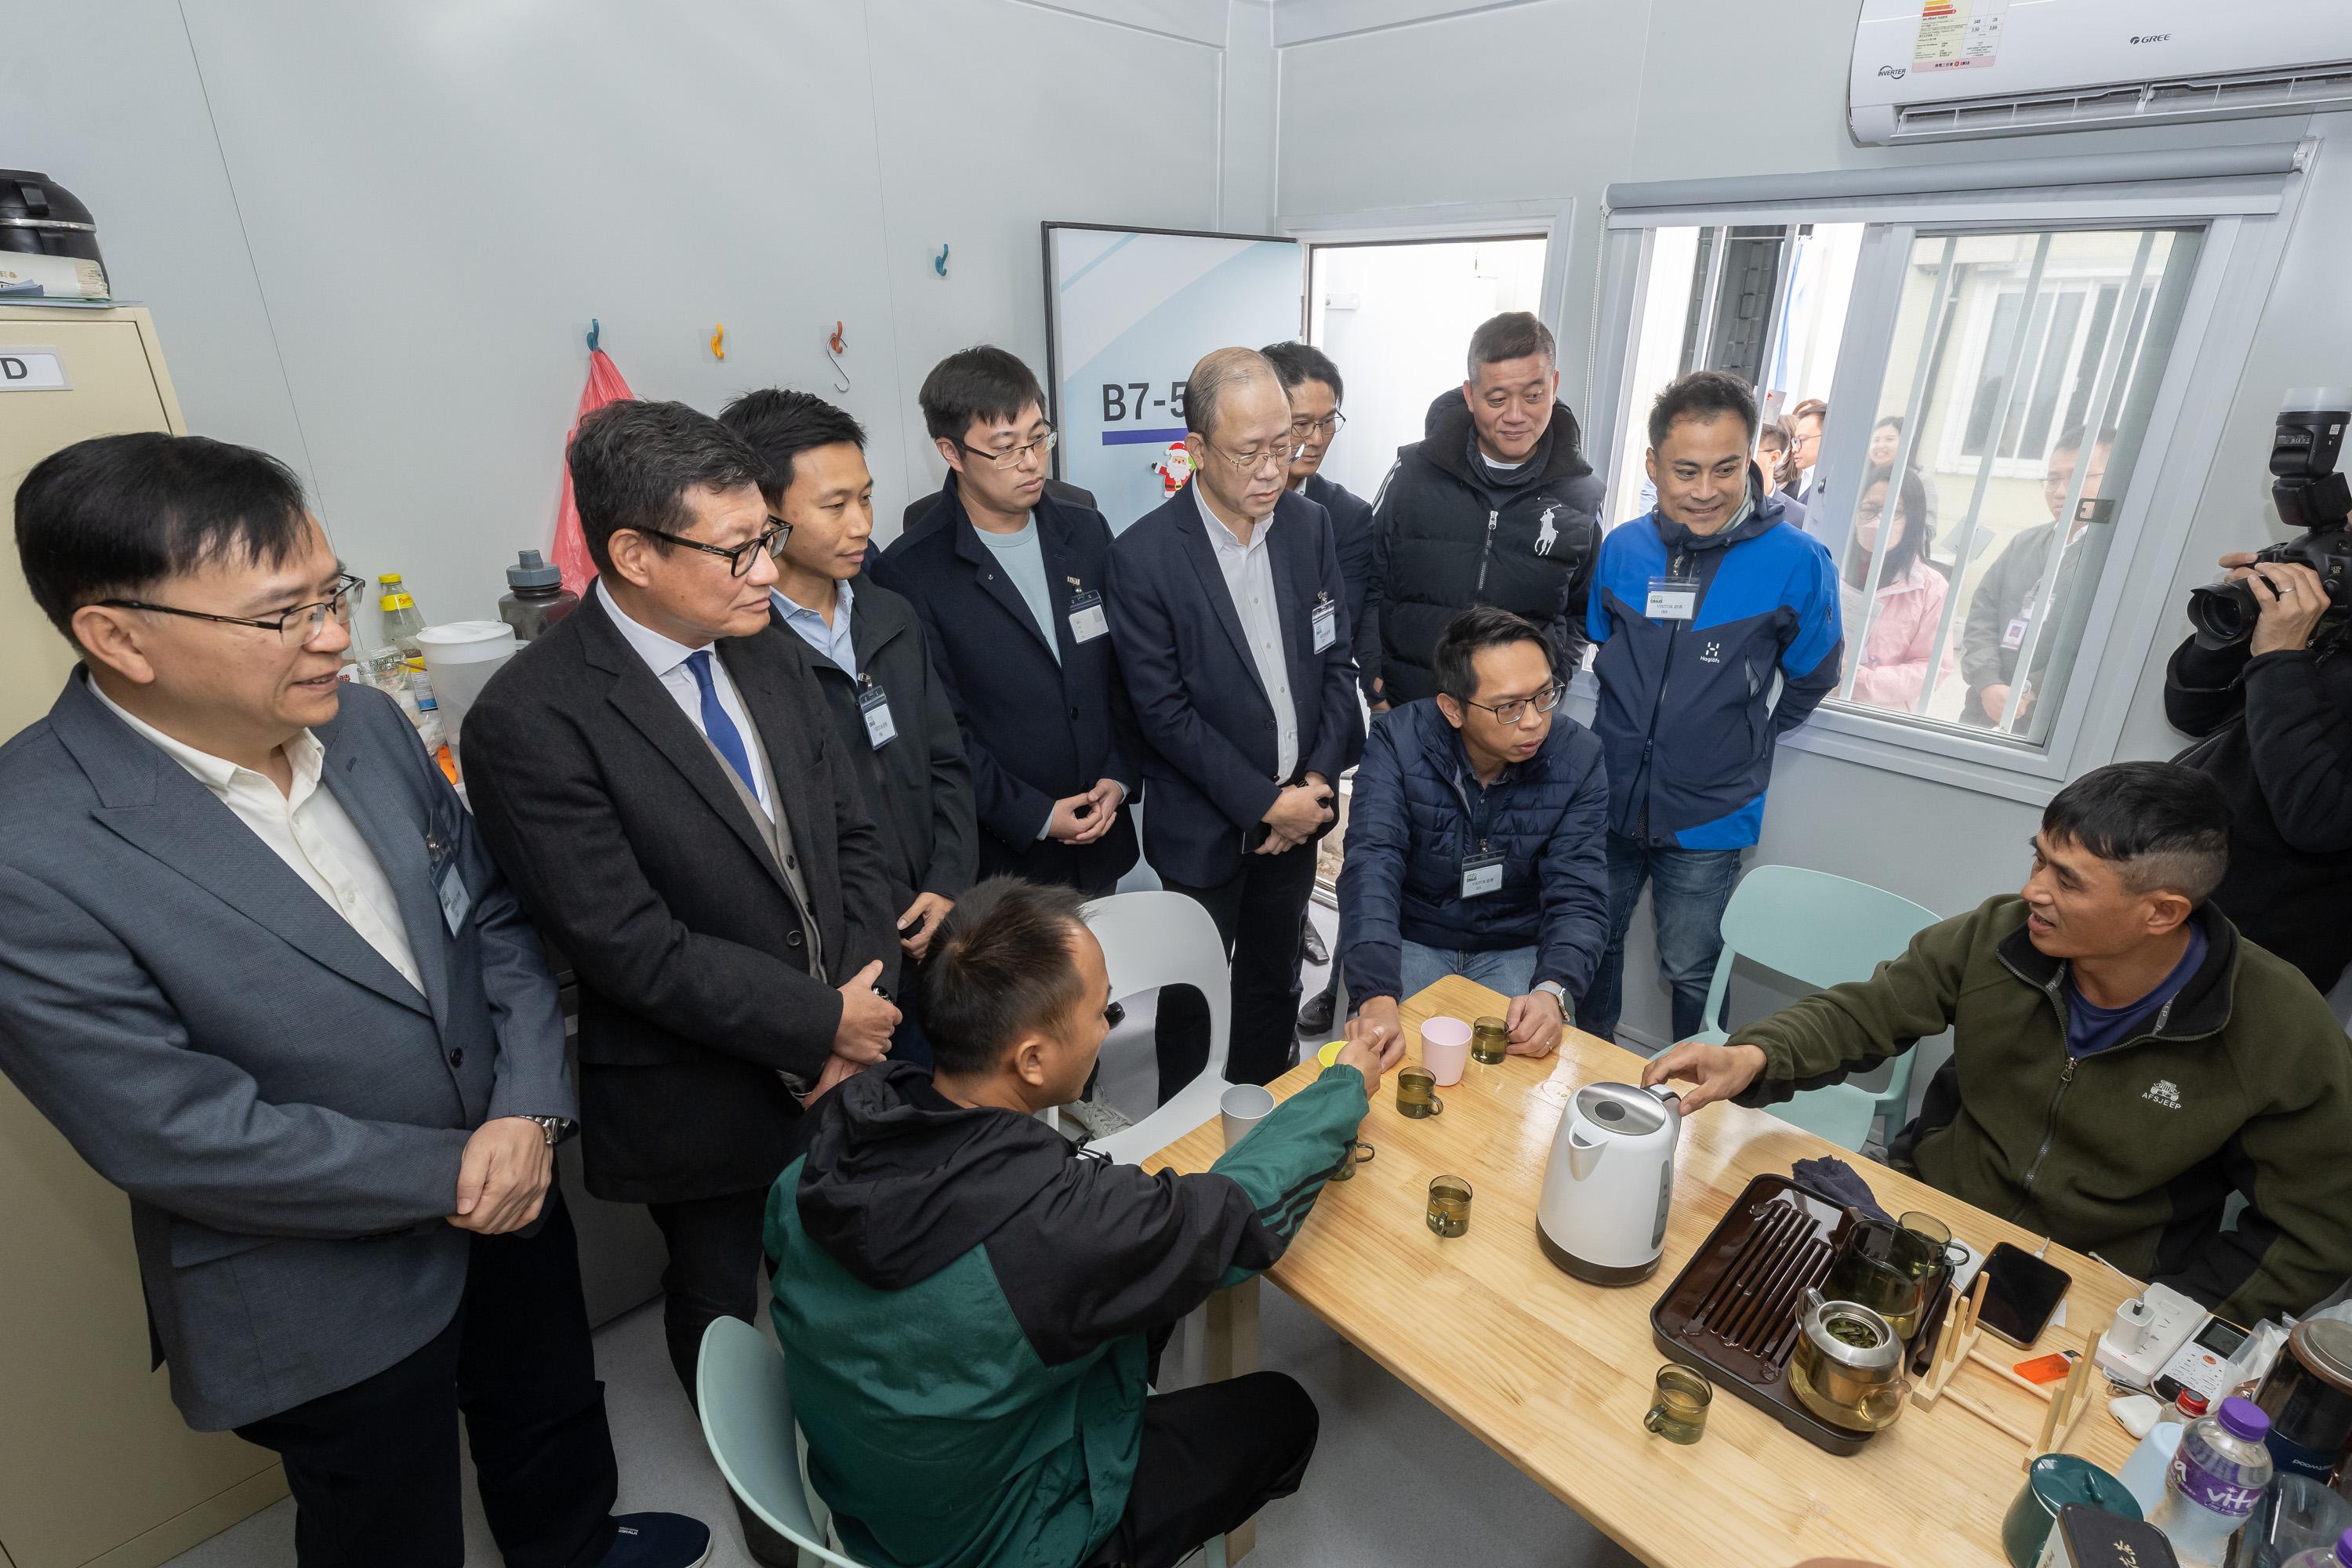 The Legislative Council Panel on Manpower visited the Construction Sector Imported Labour Quarters in Tam Mi, Yuen Long, today (December 19). Photo shows Members exchanging views with imported labourers to learn about their daily lives in Hong Kong and the support they required.